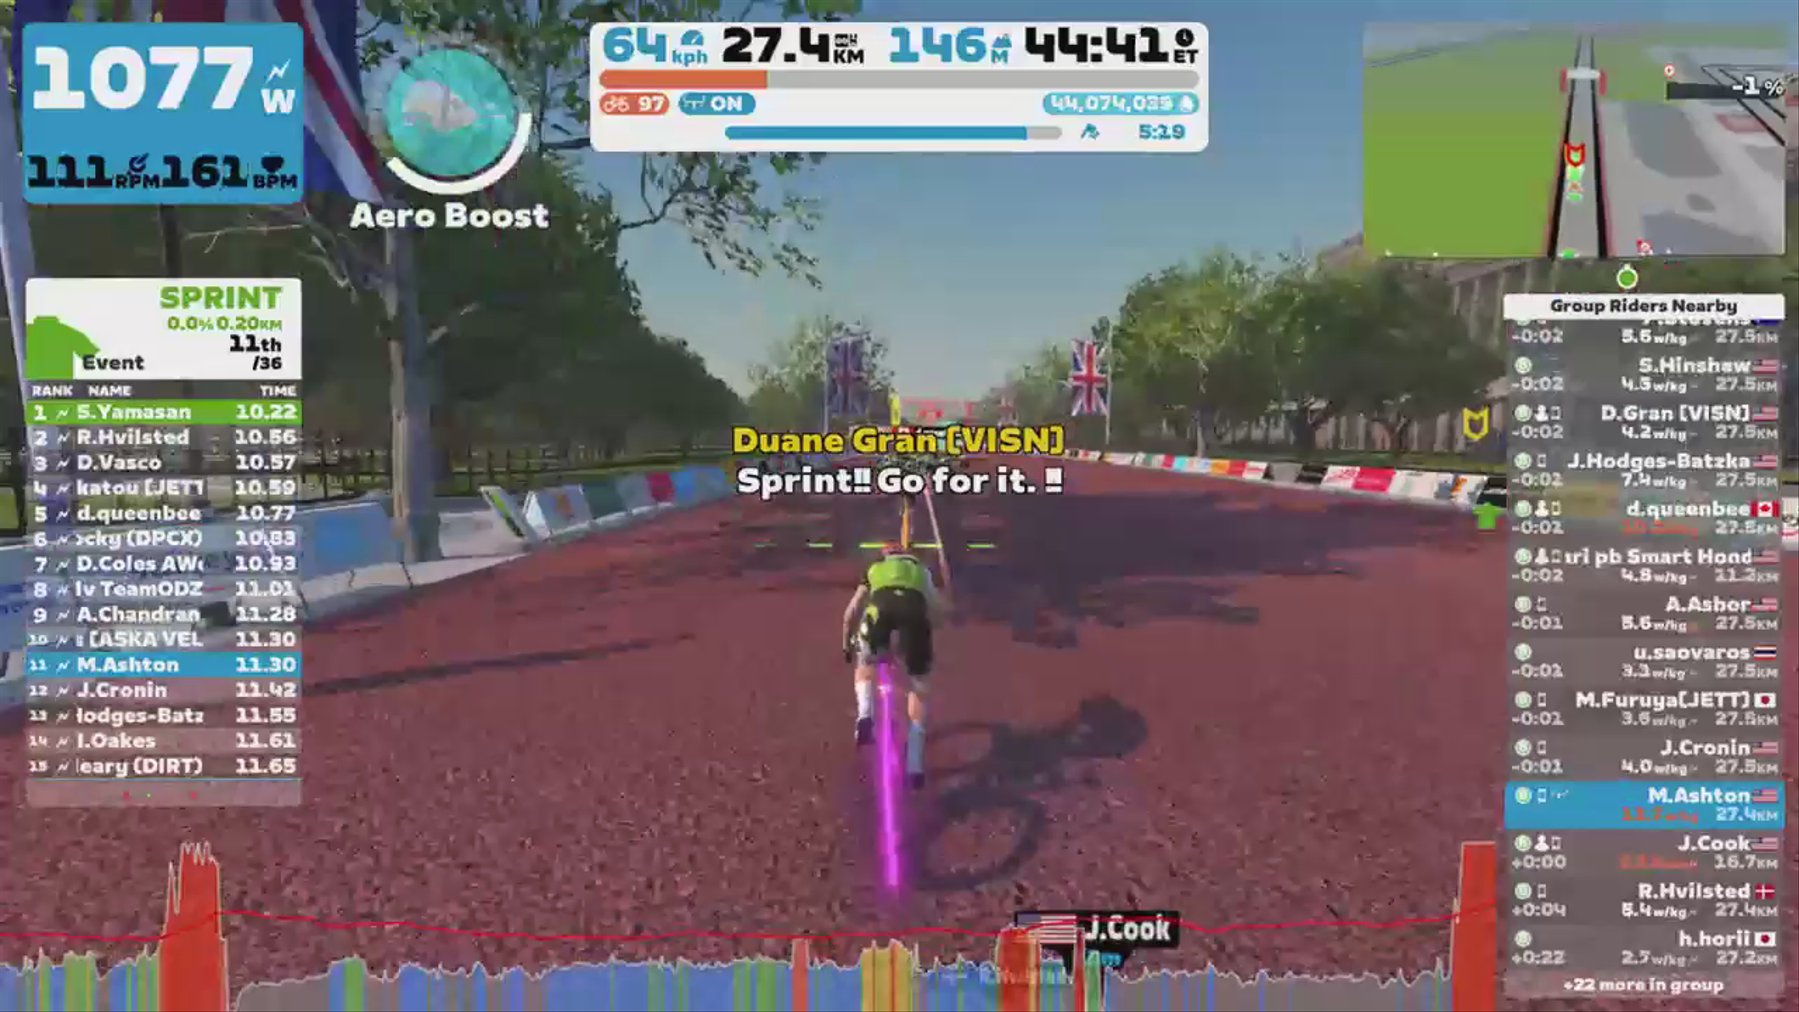 Zwift - Group Ride: Kinetic Group Ride (B) on Classique in London